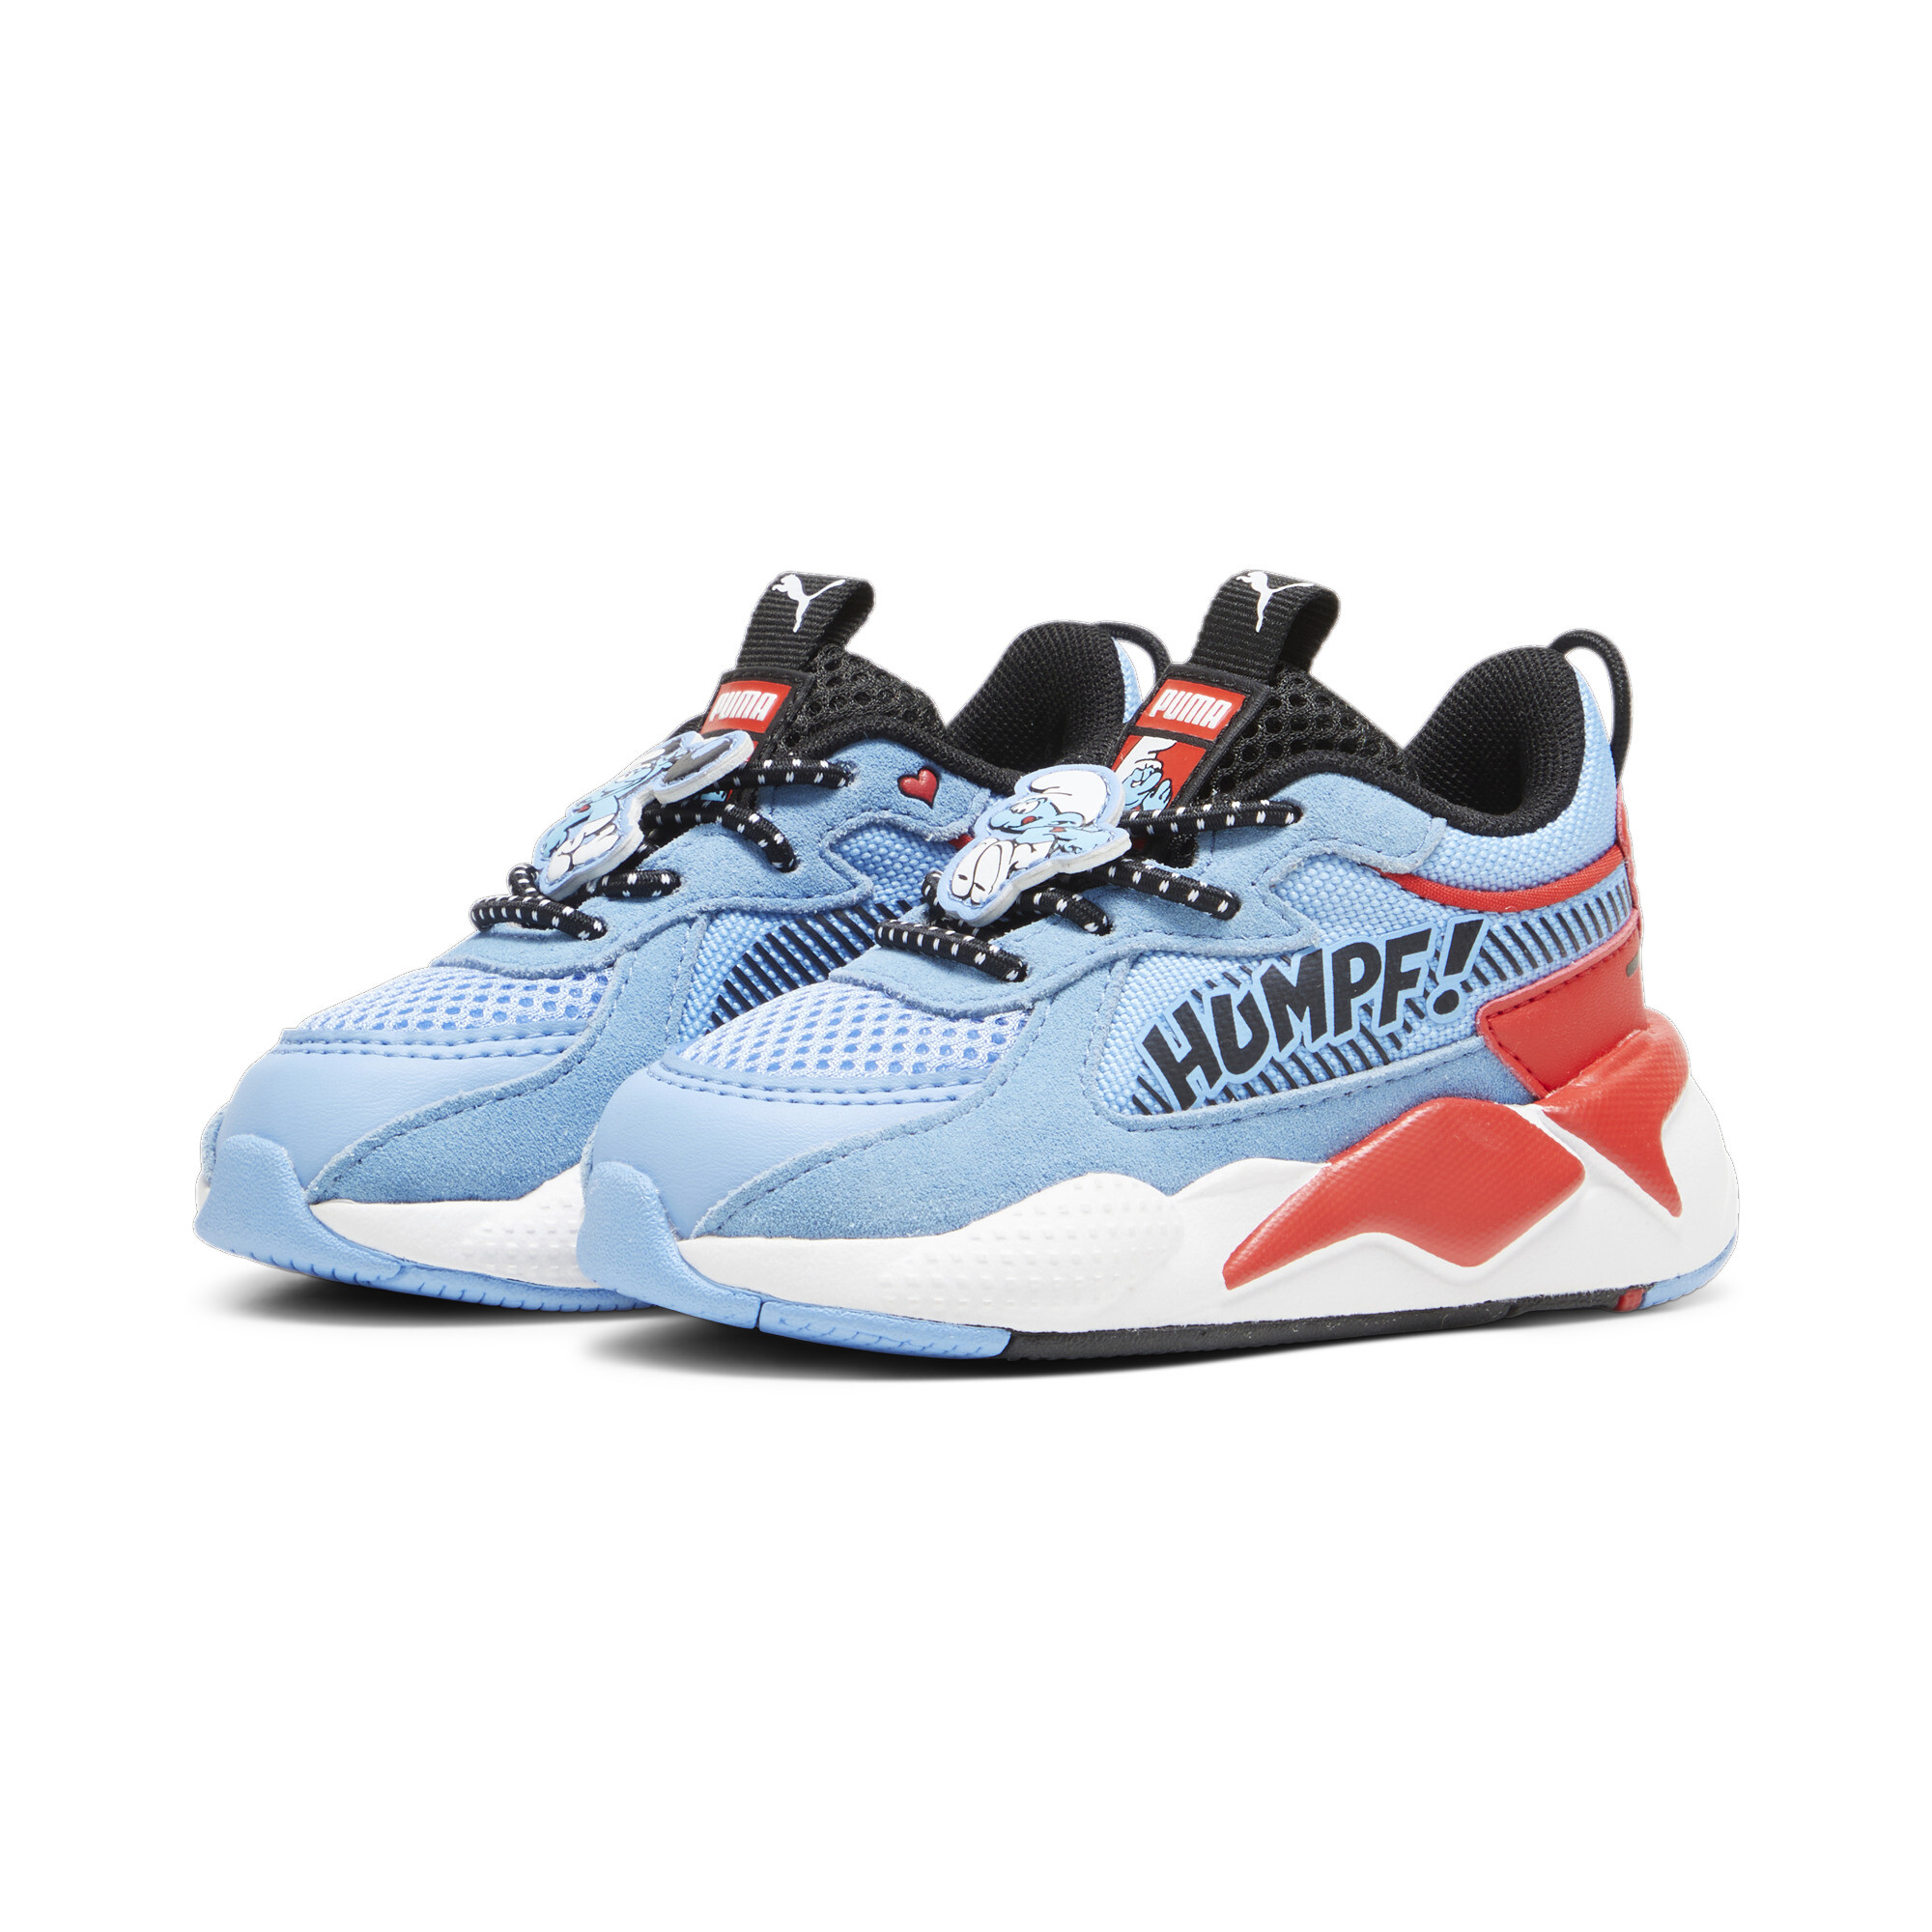 Kids' PUMA X THE SMURFS RS-X Toddlers' Sneakers In Blue, Size EU 20